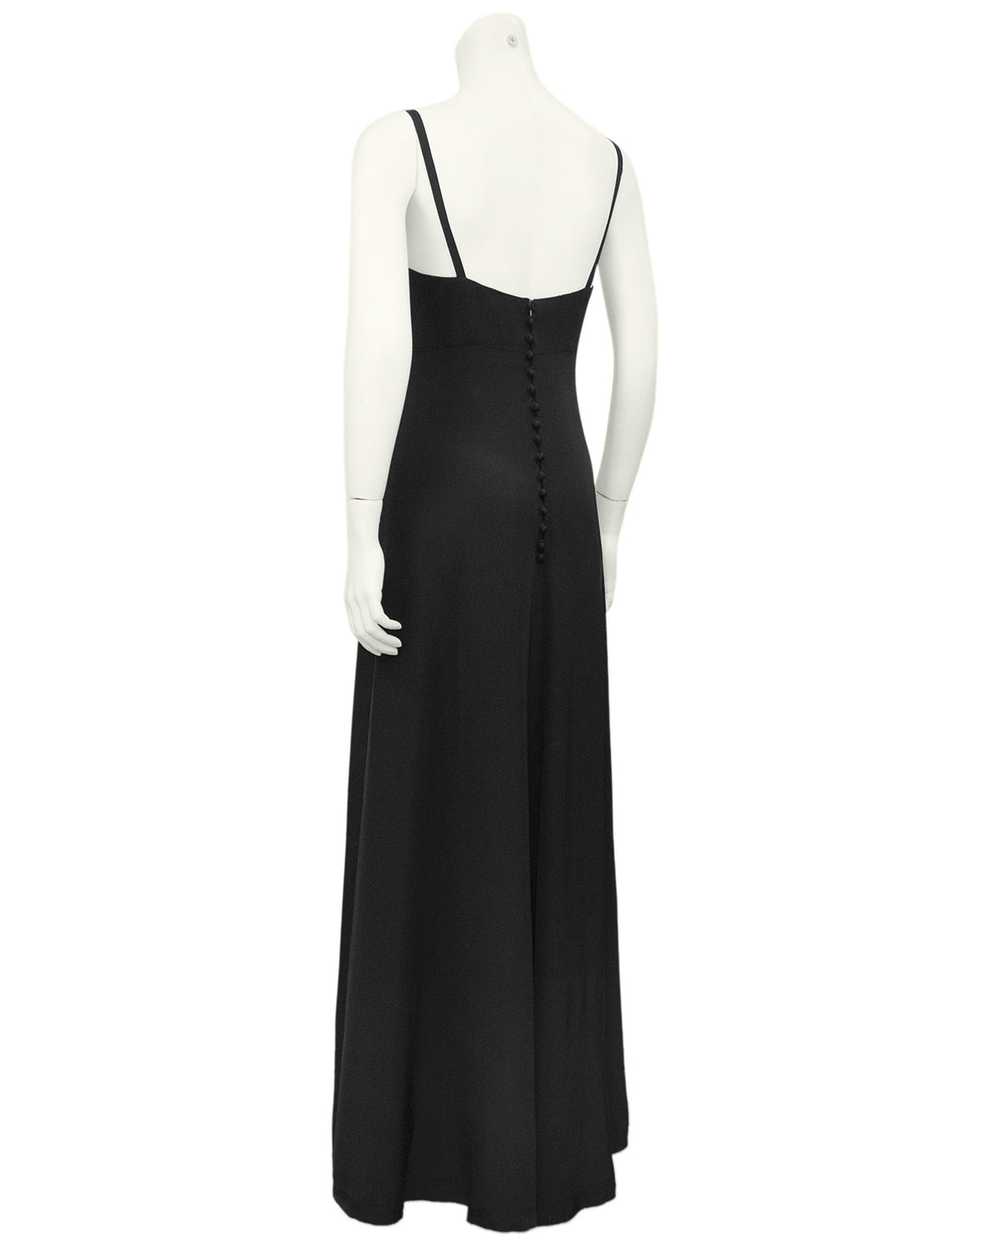 Chanel Couture Black Haute Couture Silk Gown - image 2